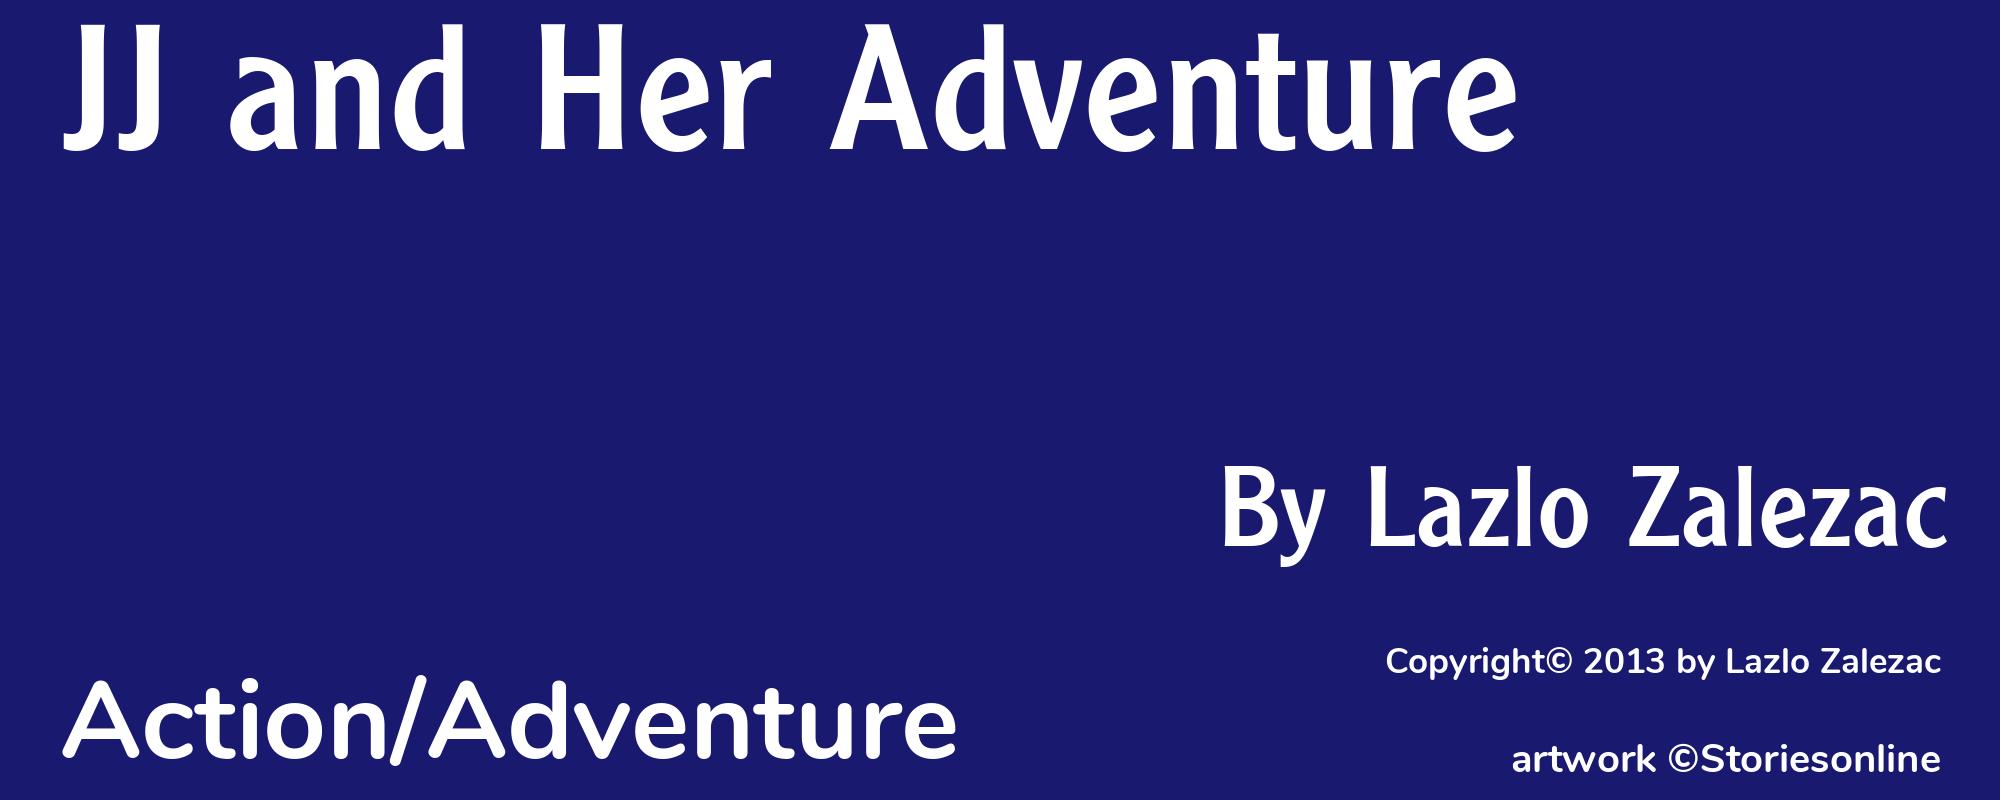 JJ and Her Adventure - Cover